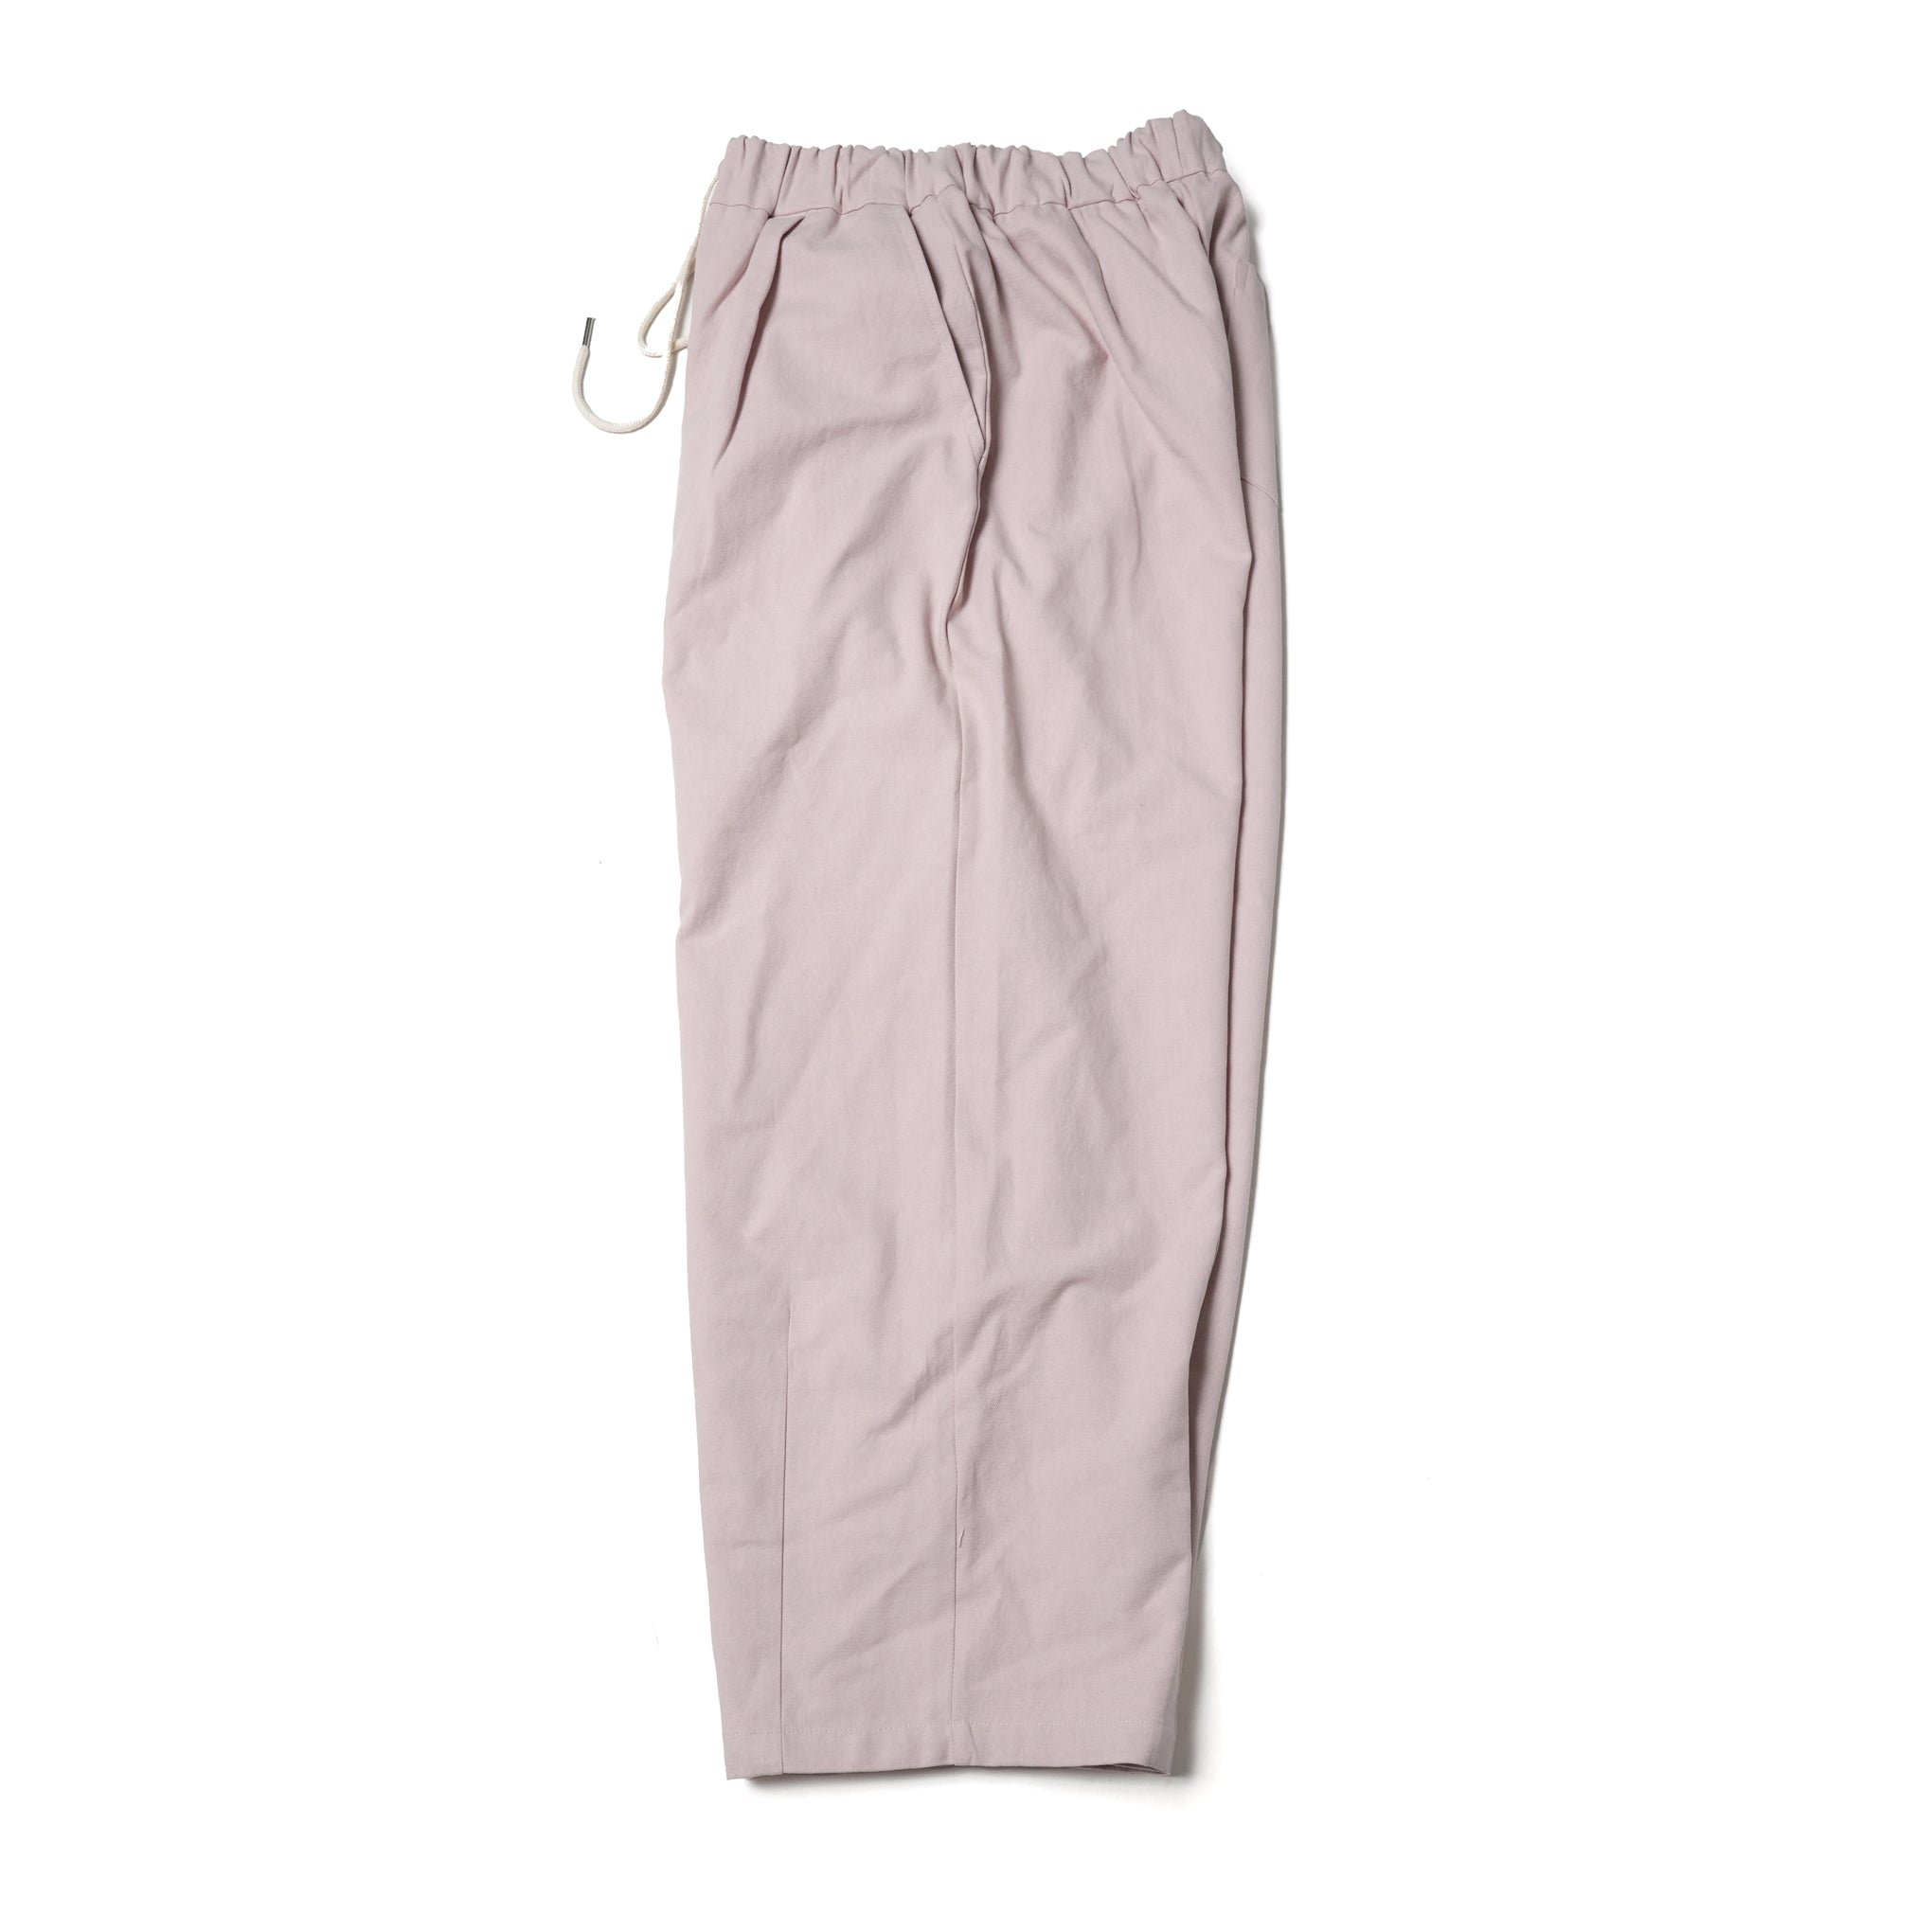 No:co-2023aw01a | Name:BOY WIDE CHINO PANTS | Color:Indi Pink【CONICHIWA BONJOUR_コニチワボンジュール】【入荷予定アイテム・入荷連絡可能】